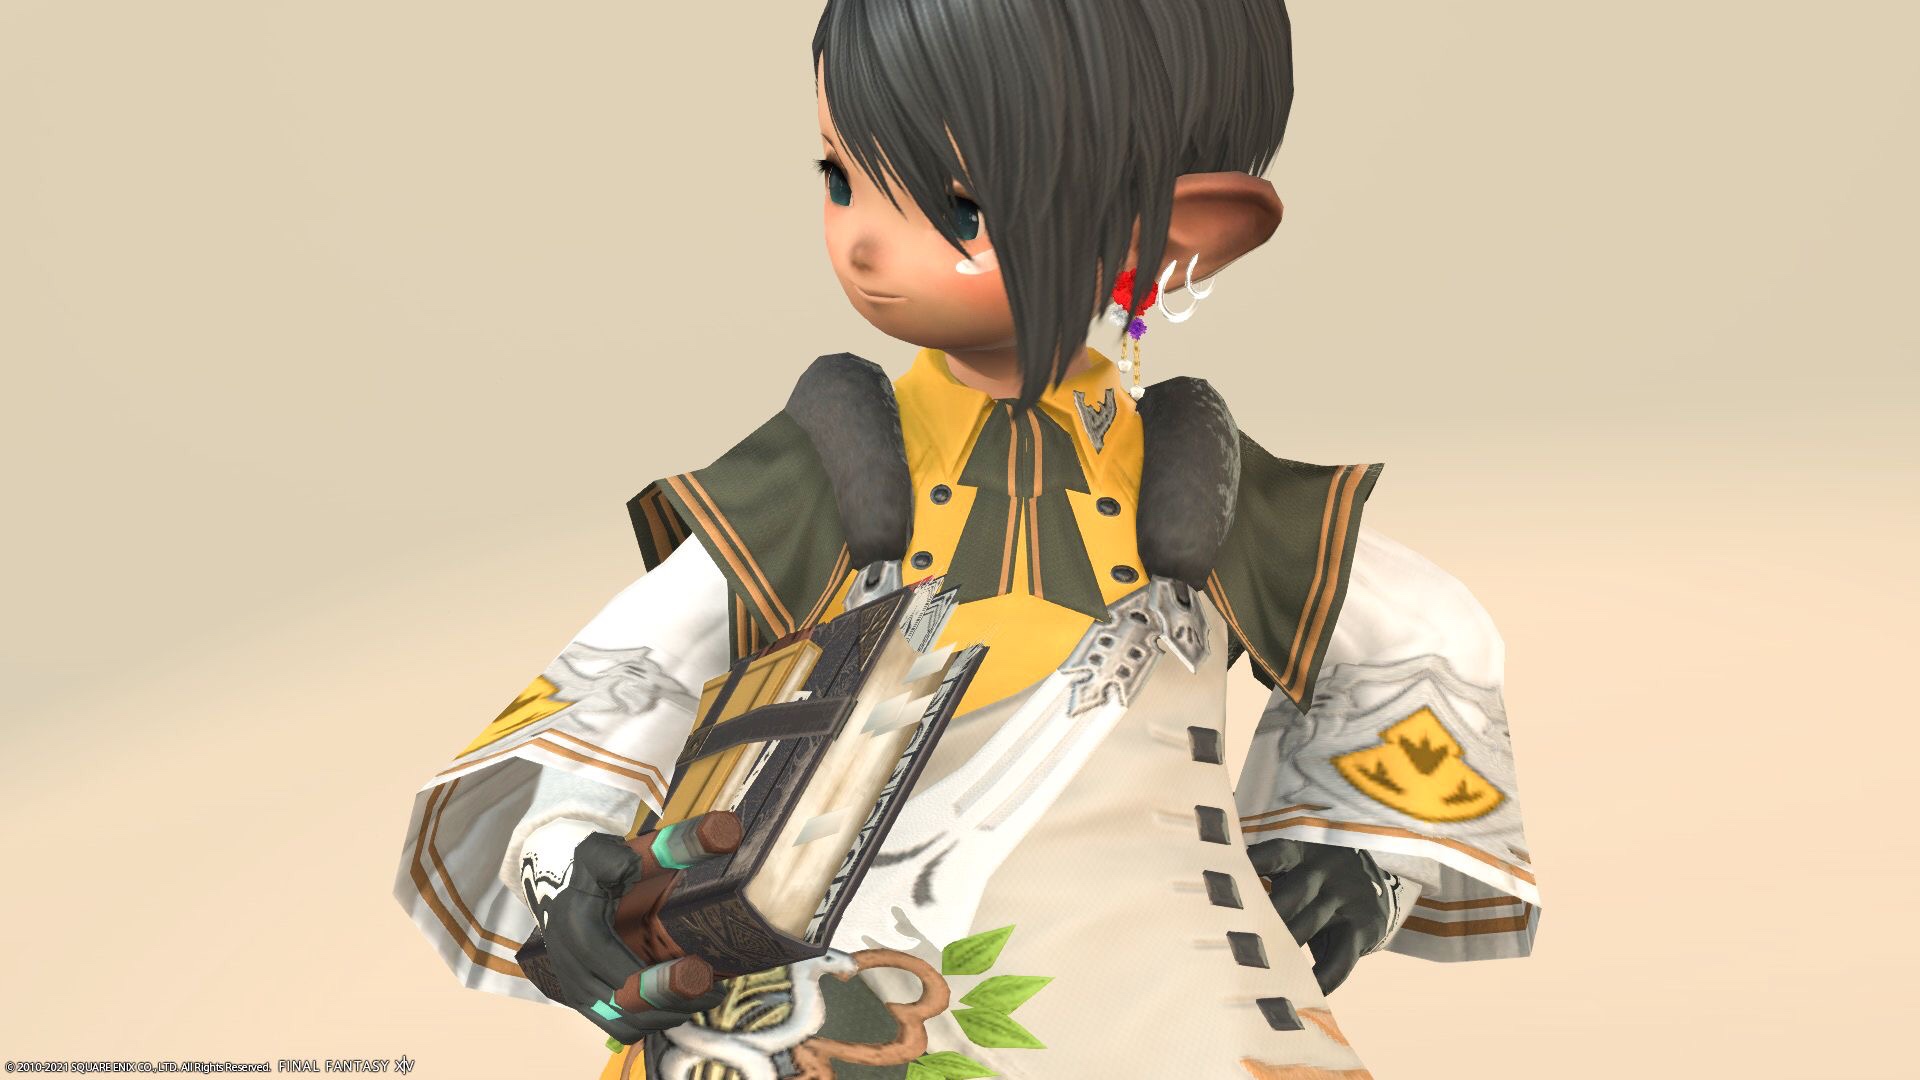 Glamour Senior Officer Of The Order Of The Twin Adder Of The Black Shroud In Serpent Lieutenant S Coat That Can Be Worn For All Jobs Norirow Note エオルゼア戦記 Ff14ブログ